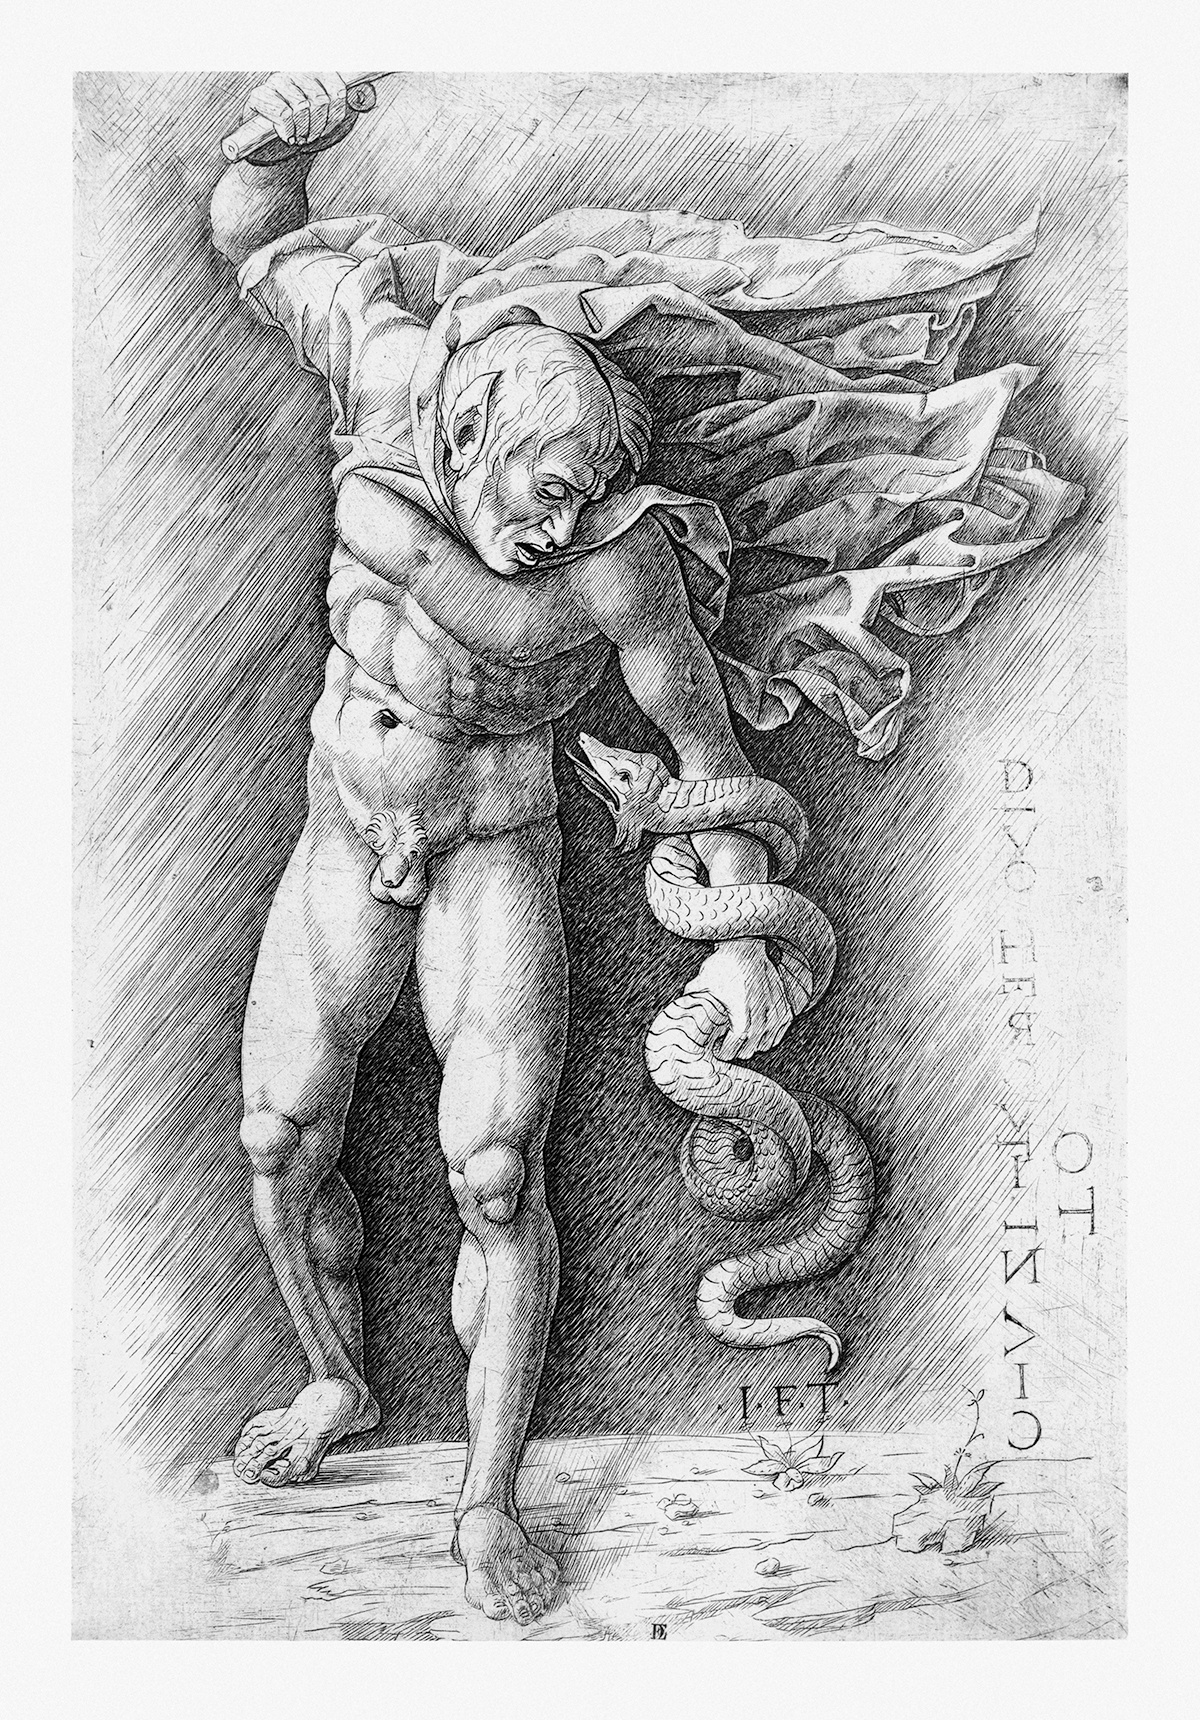 An engraving of a naked man who fights with a snake